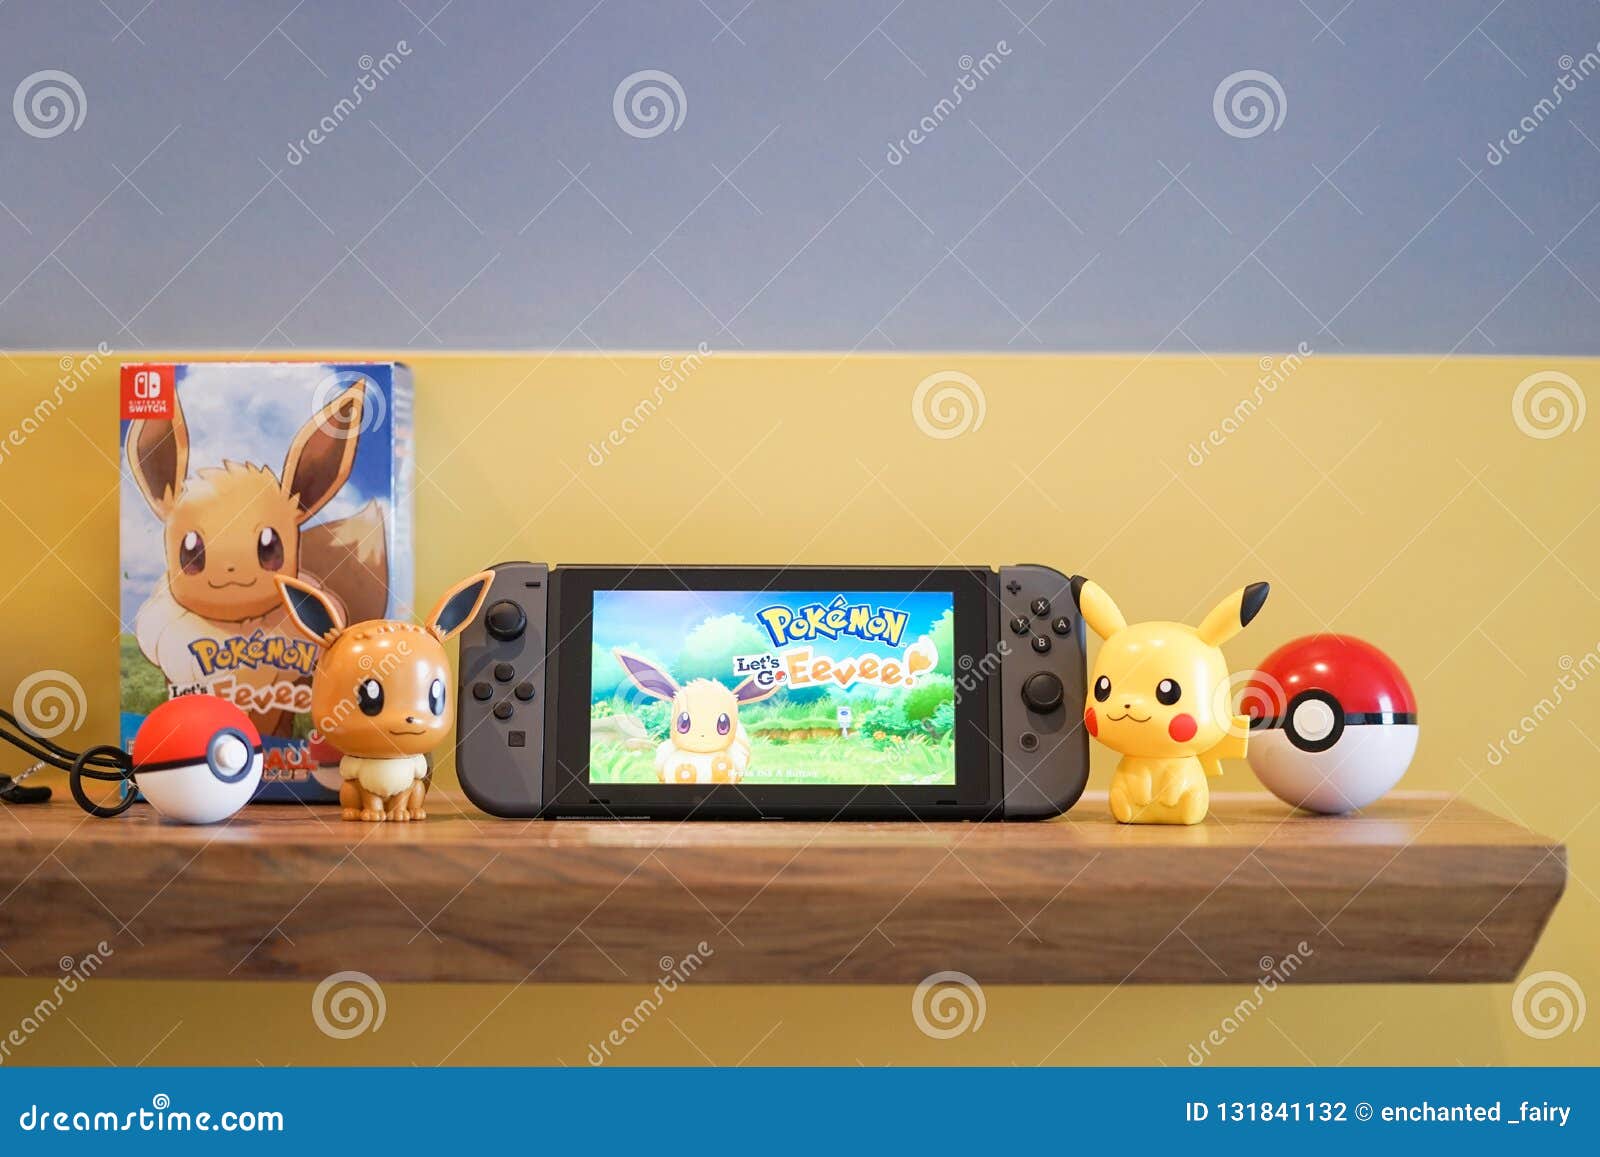 Nintendo Switch And Pokemon Lets Go Eevee And Pikachu